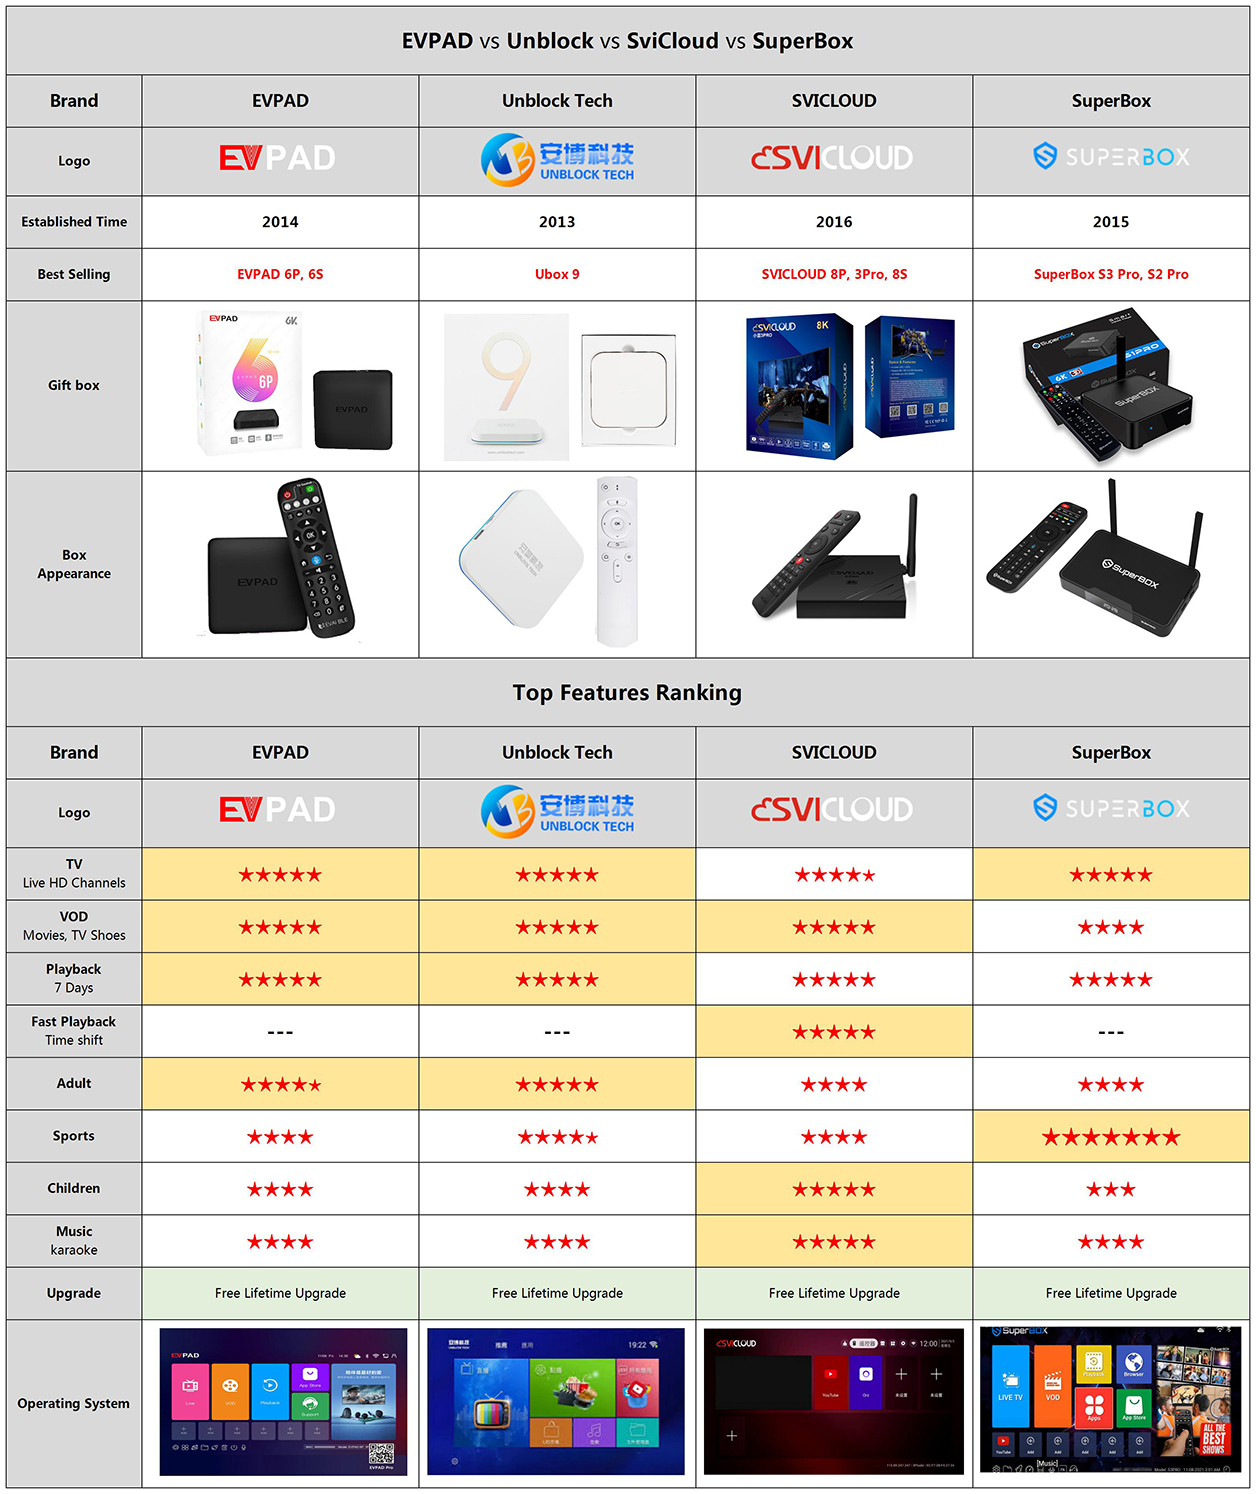 What is the difference between SviCloud Box and other products in the market such as EVPAD, Unblock Tech, Boss TV, DreamBox, and PVBox?